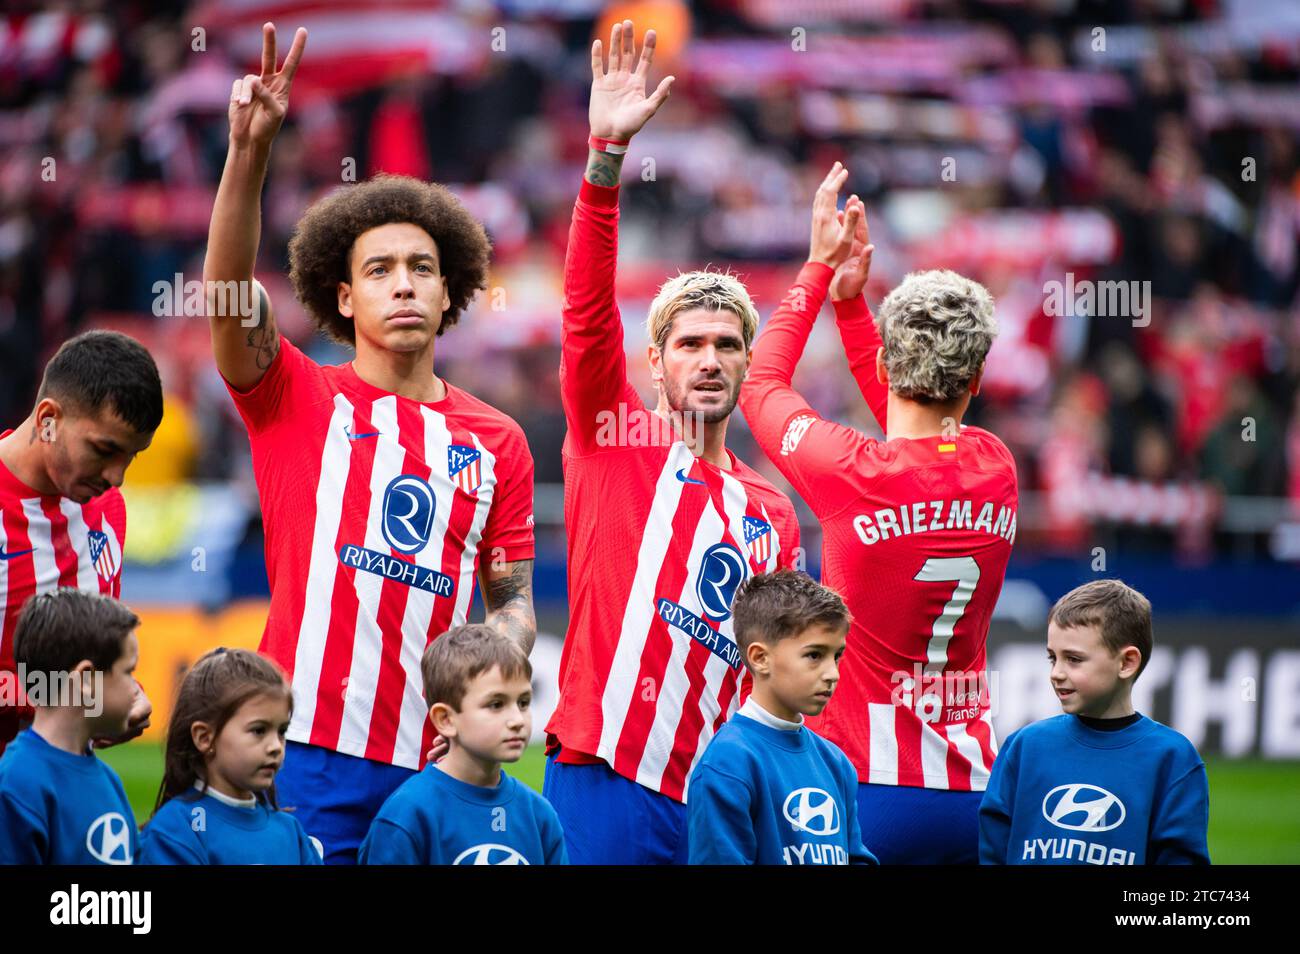 Axel Witsel (L), Rodrigo De Paul (C) and Antoine Griezmann (R) of Atletico  Madrid seen in action during the La Liga EA Sports 2023/24 football match  between Atletico Madrid and Almeria at